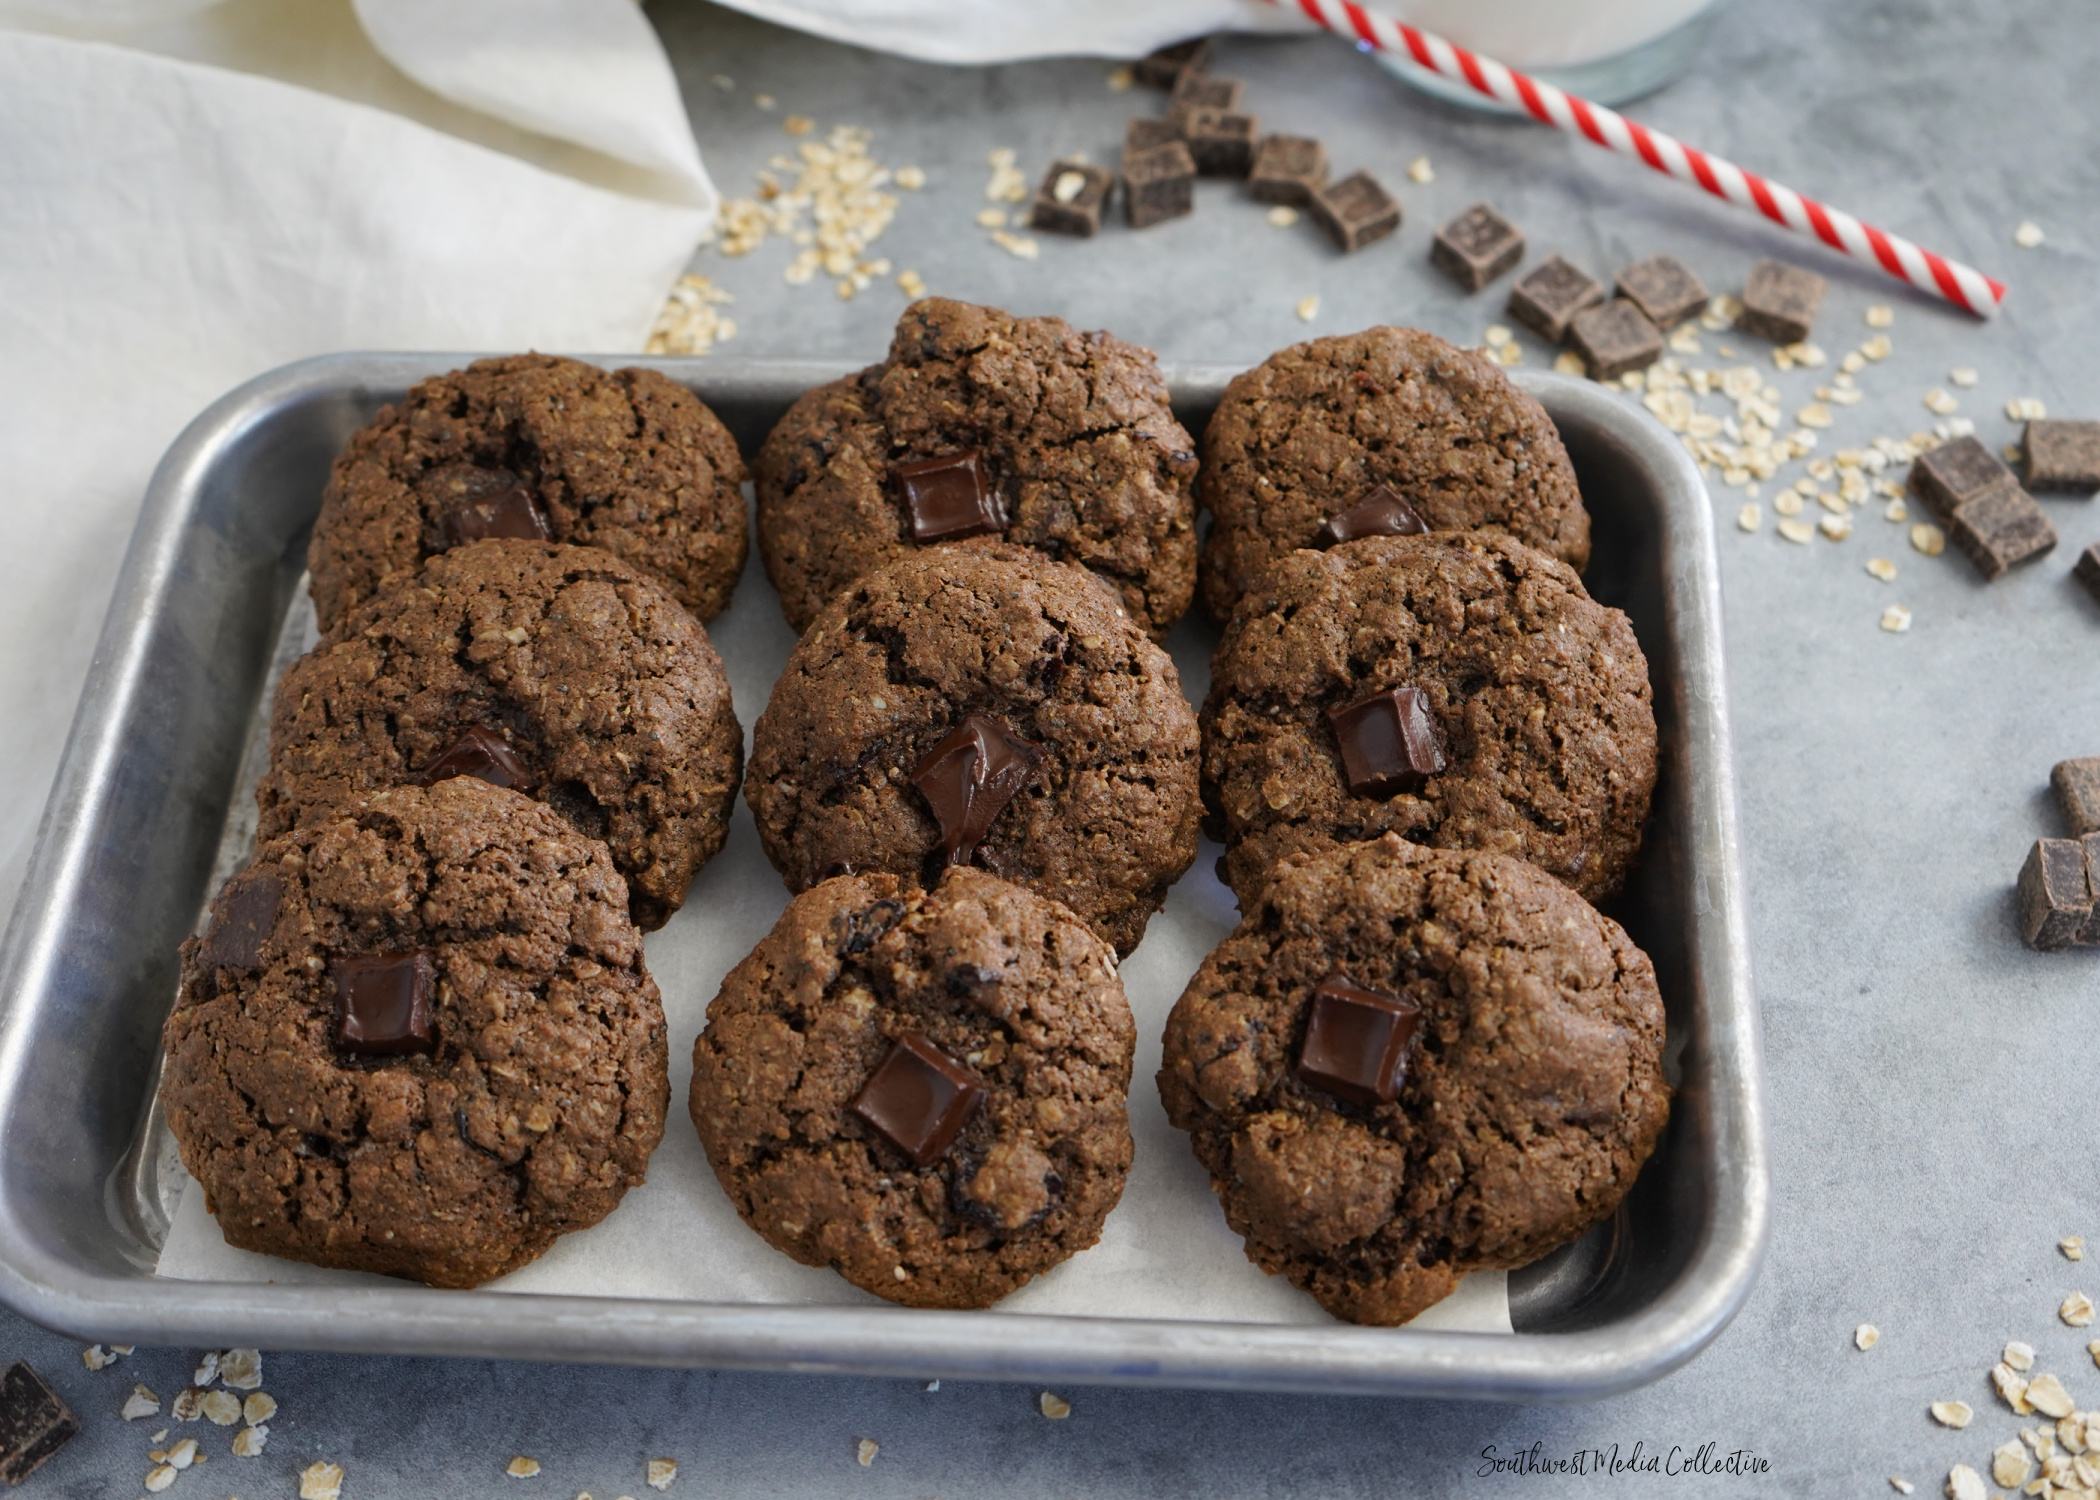 Step by step directions to make these delicious, decadent Healthy Cherry Chocolate Cookies - you won't know how you ever lived without them!